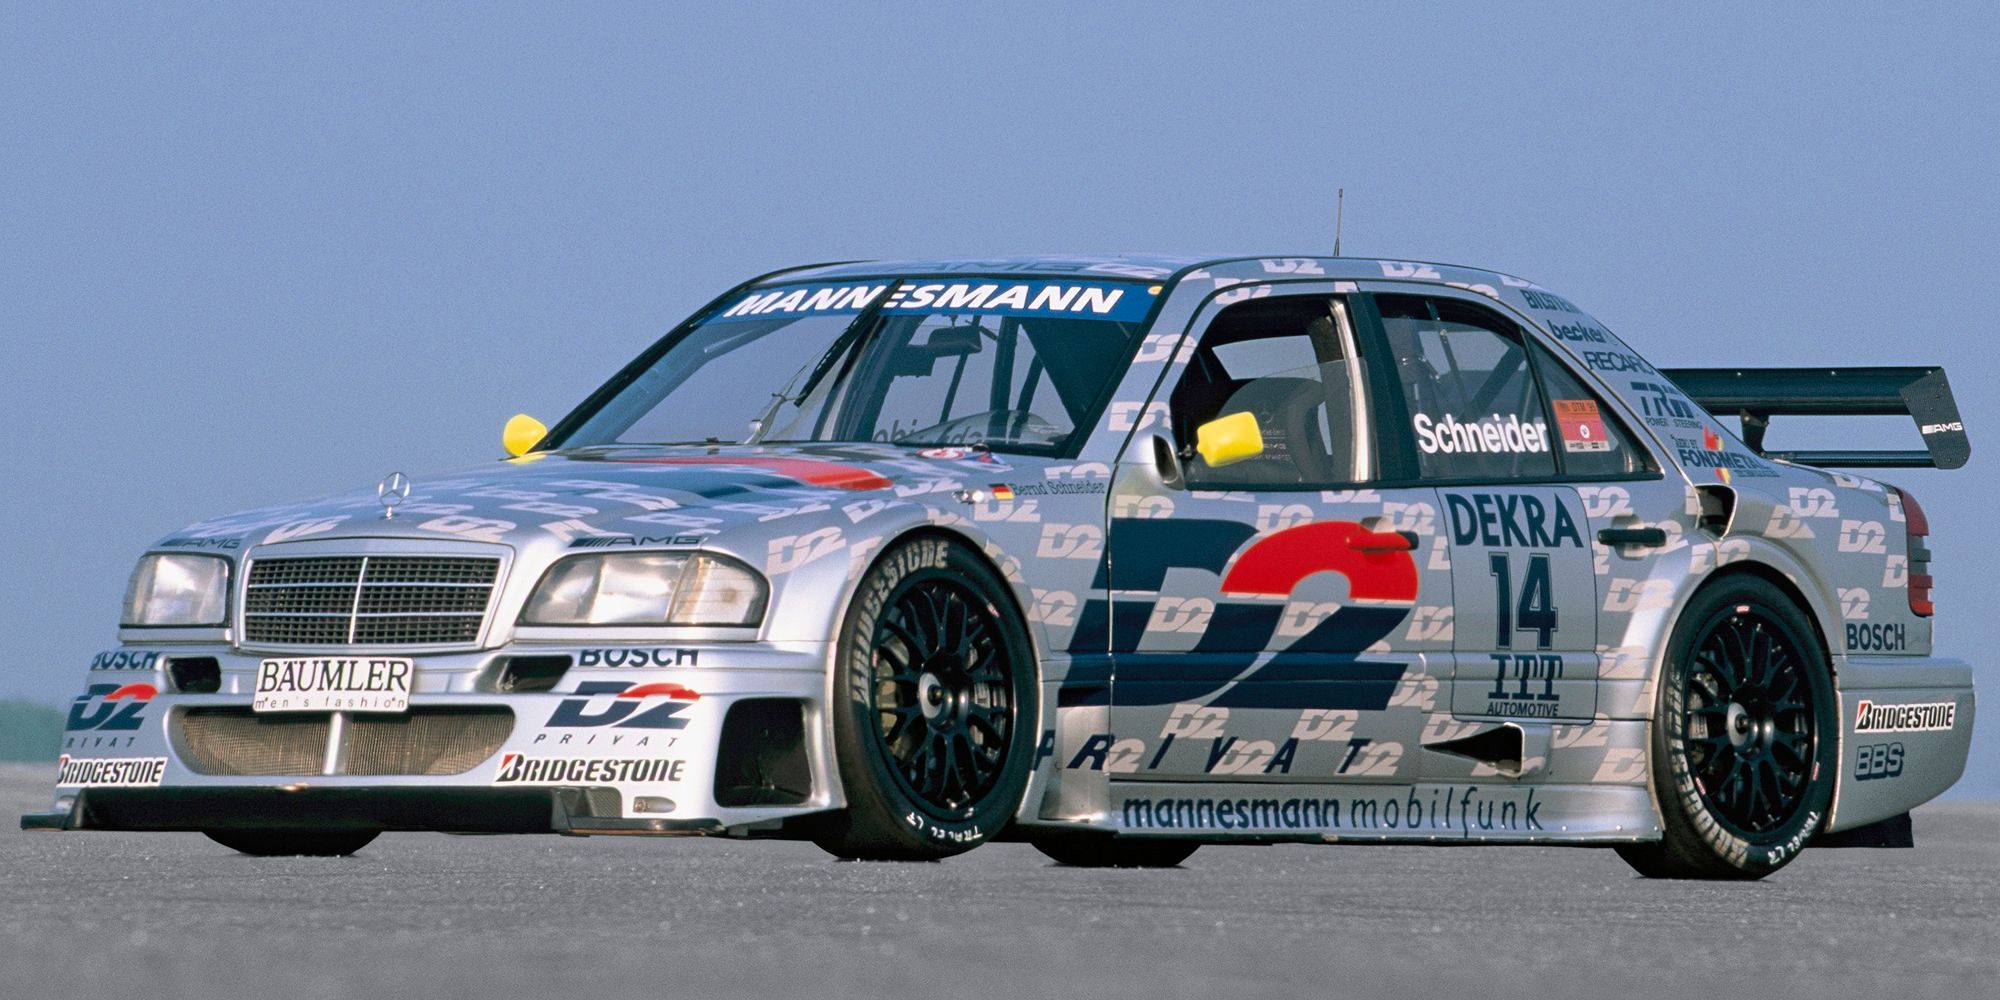 AMG Mercedes C-Class - the most successful car in DTM history